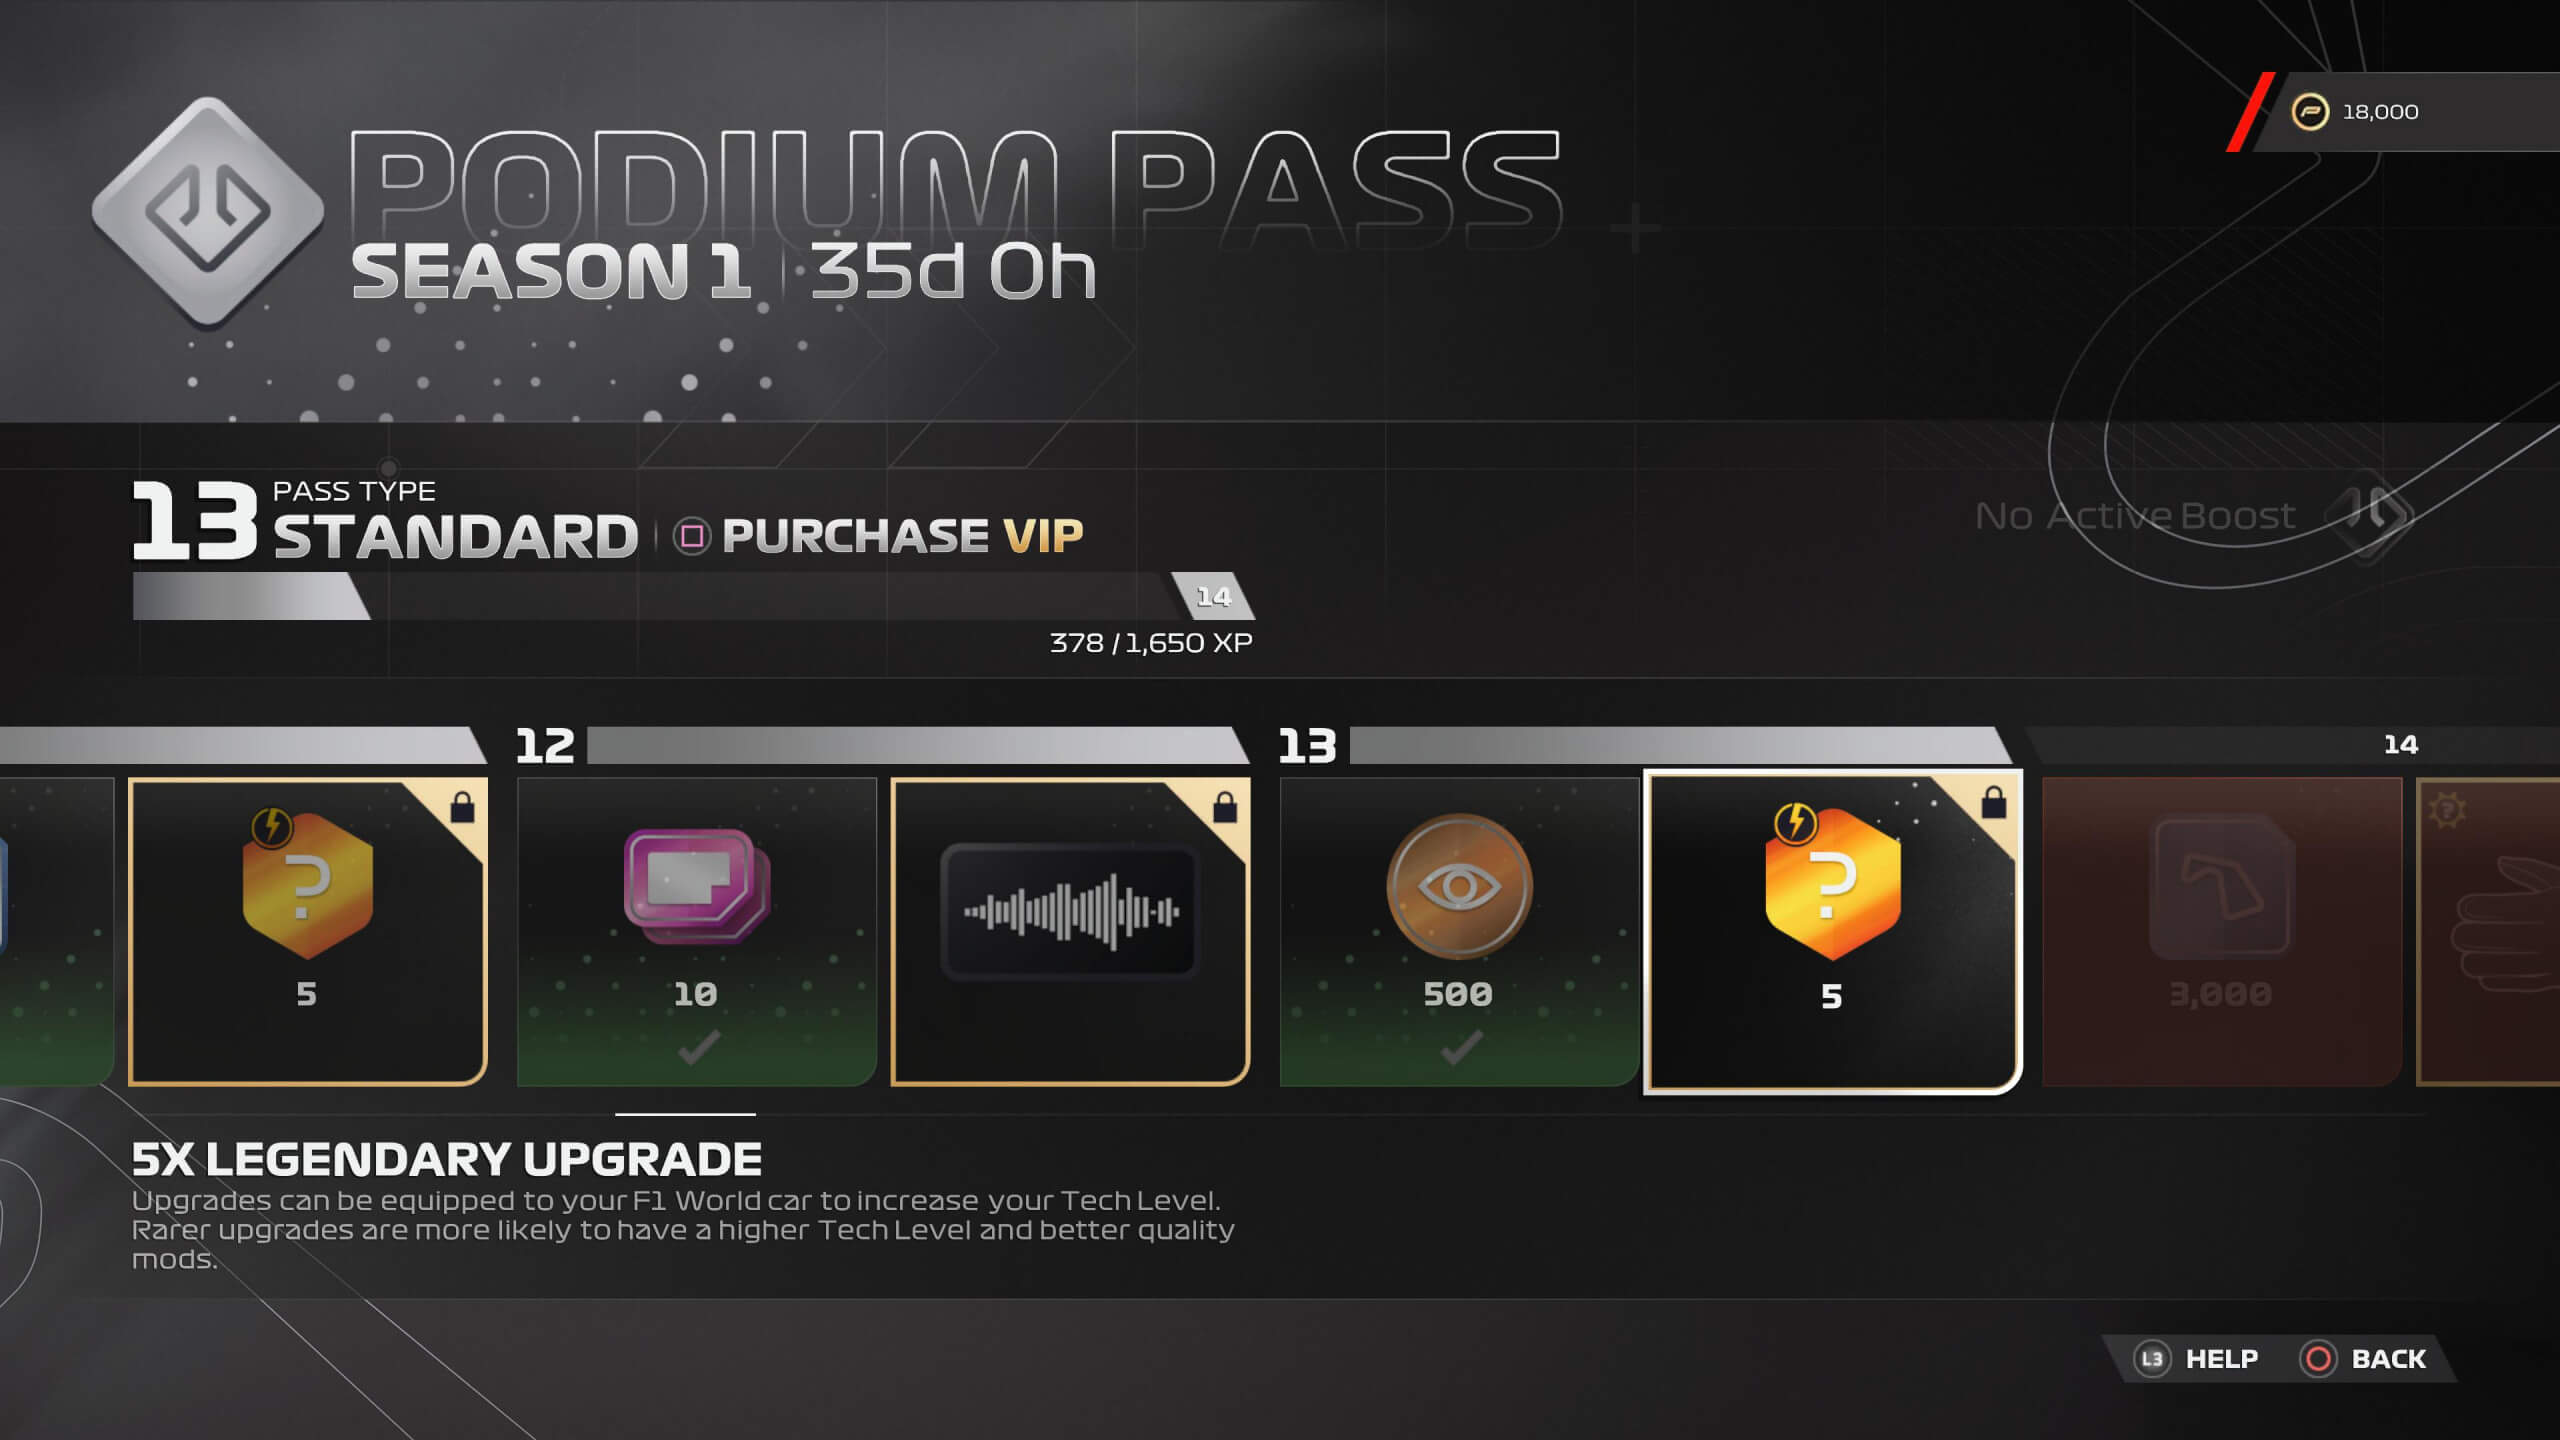 The podium Pass menu from F1 23 game showing available rewards. Currently selected in the menu is the 5X Legendary Upgrade which has a lock on its icon depicting the fact that its yet to be unlocked.